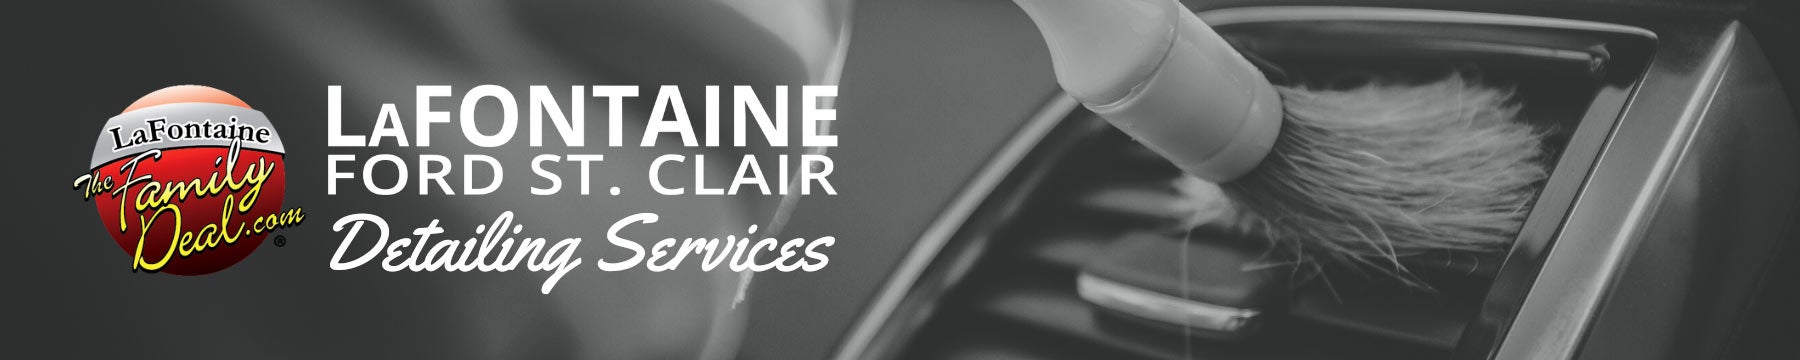 LaFontaine Ford St Clair in Saint Clair MI Detailing Services